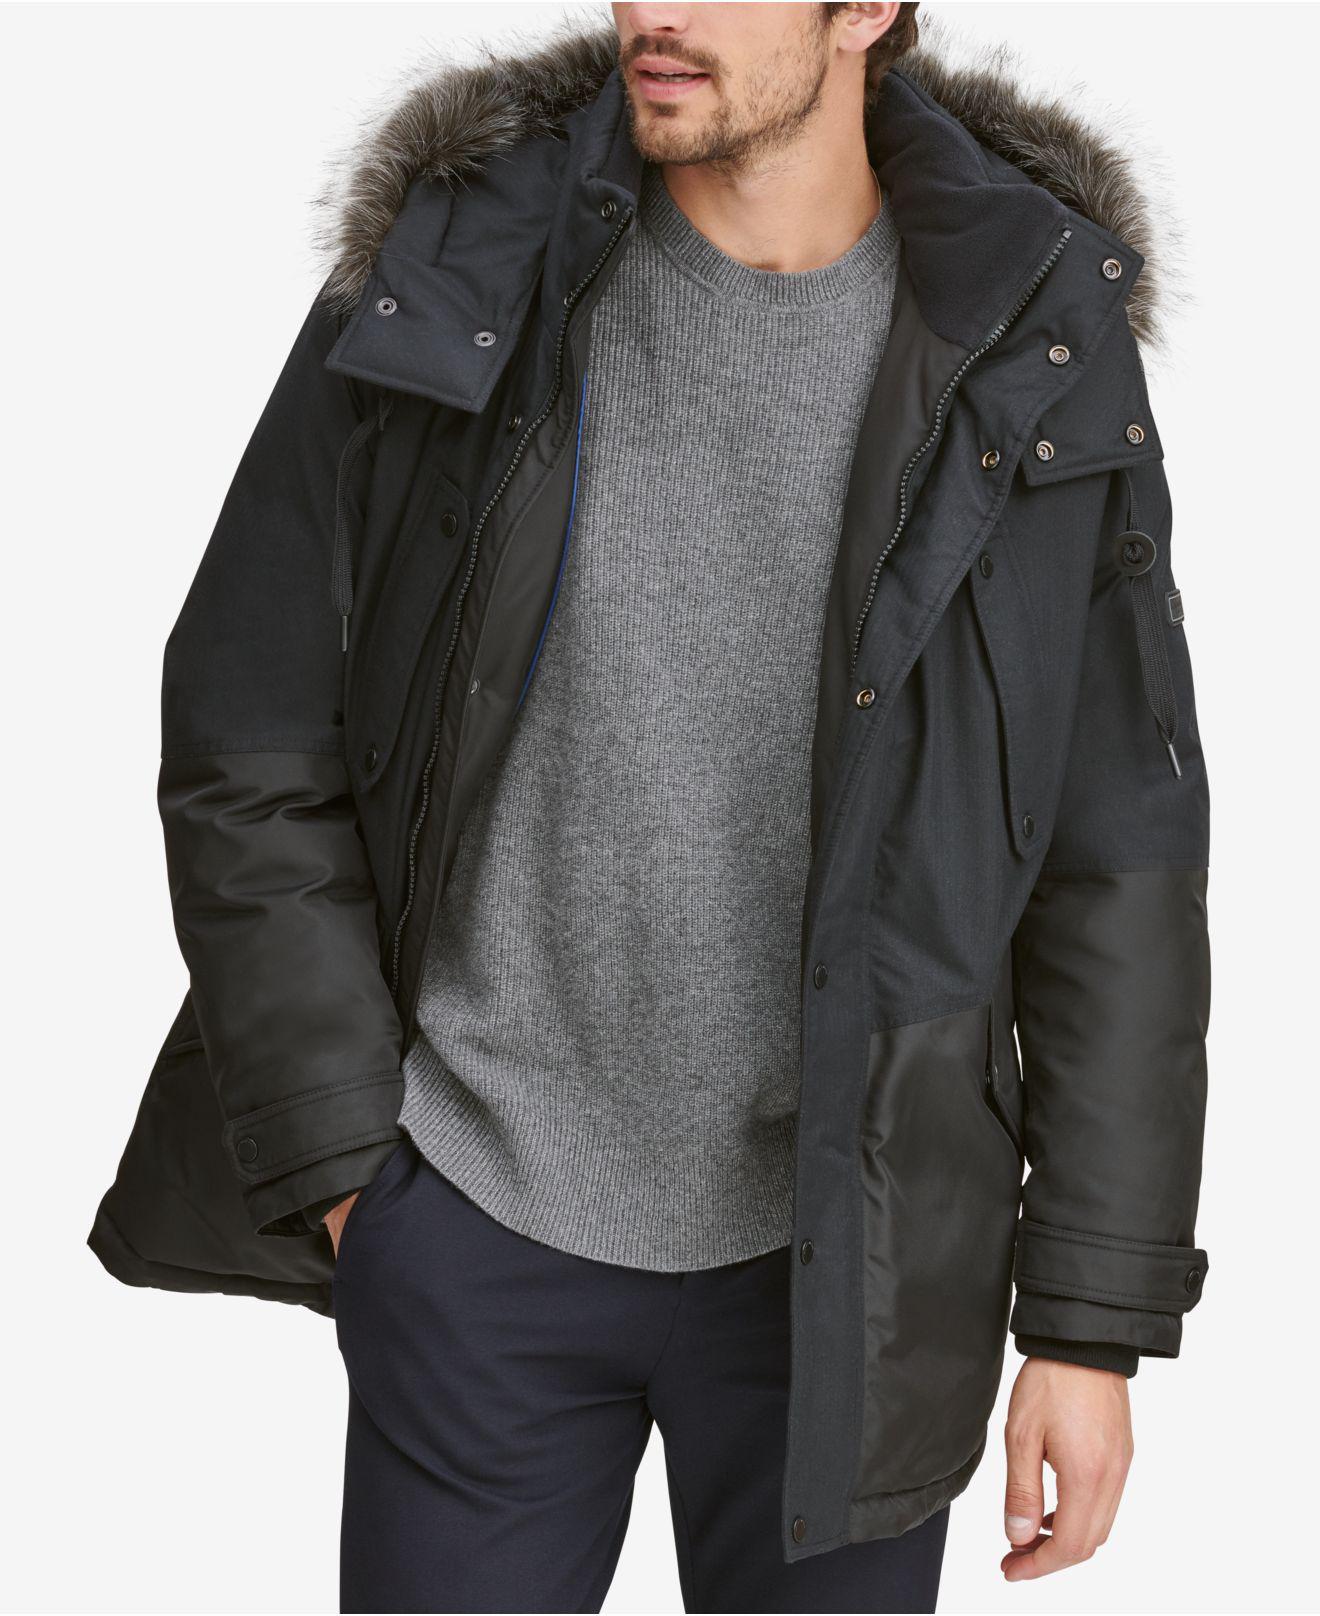 Marc New York Mixed-media Parka With Removable Hood in Black for Men - Lyst